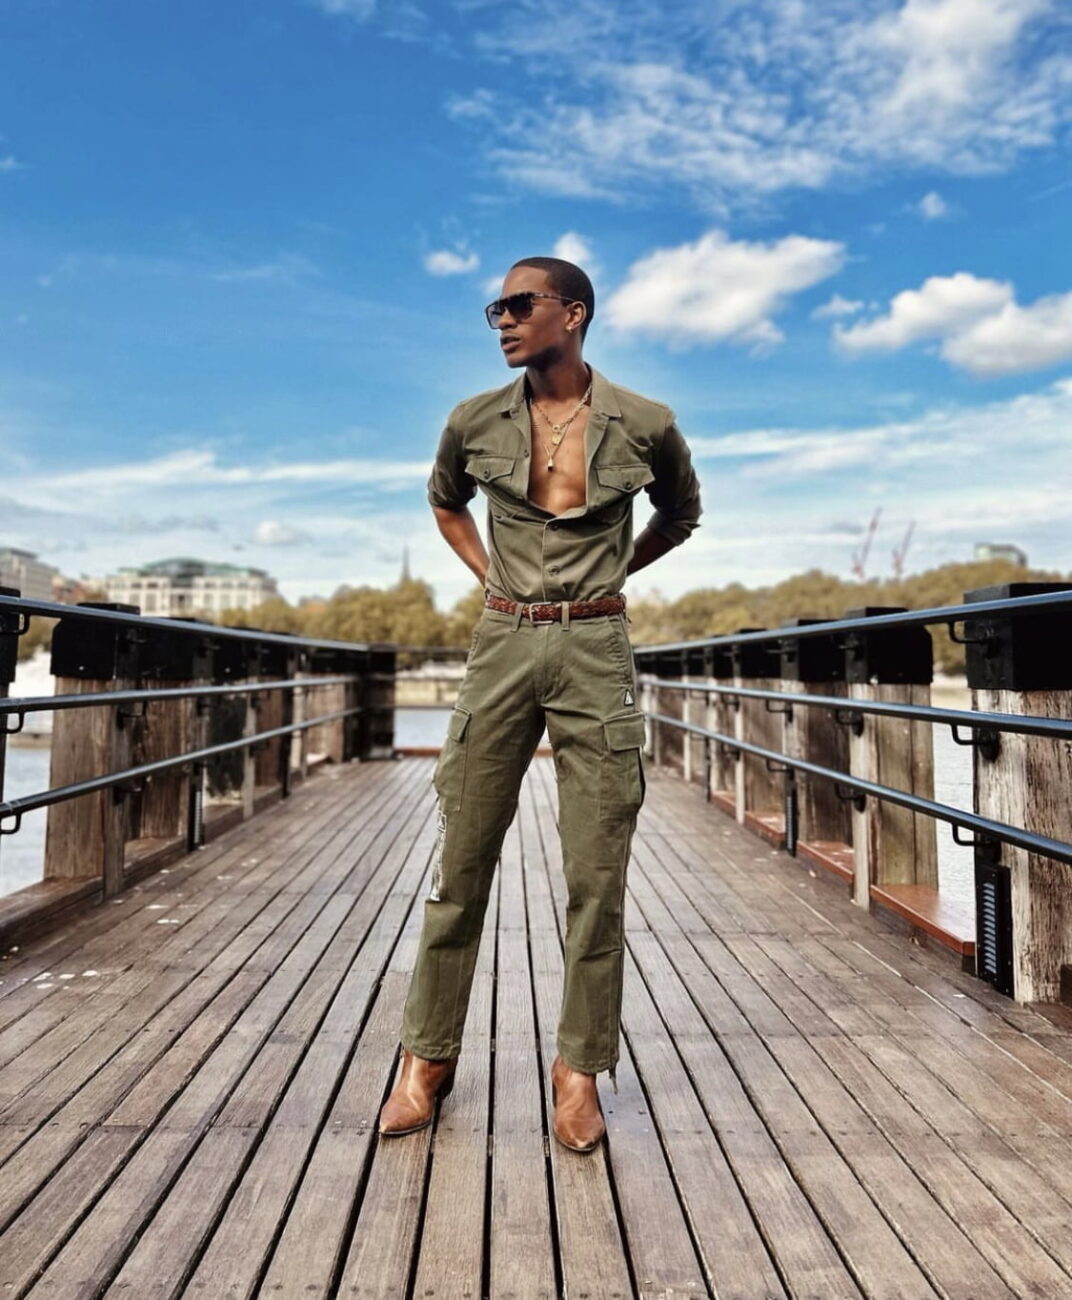 Denola Grey effortlessly rocking an army green jumpsuit, showcasing his cool and casual style.